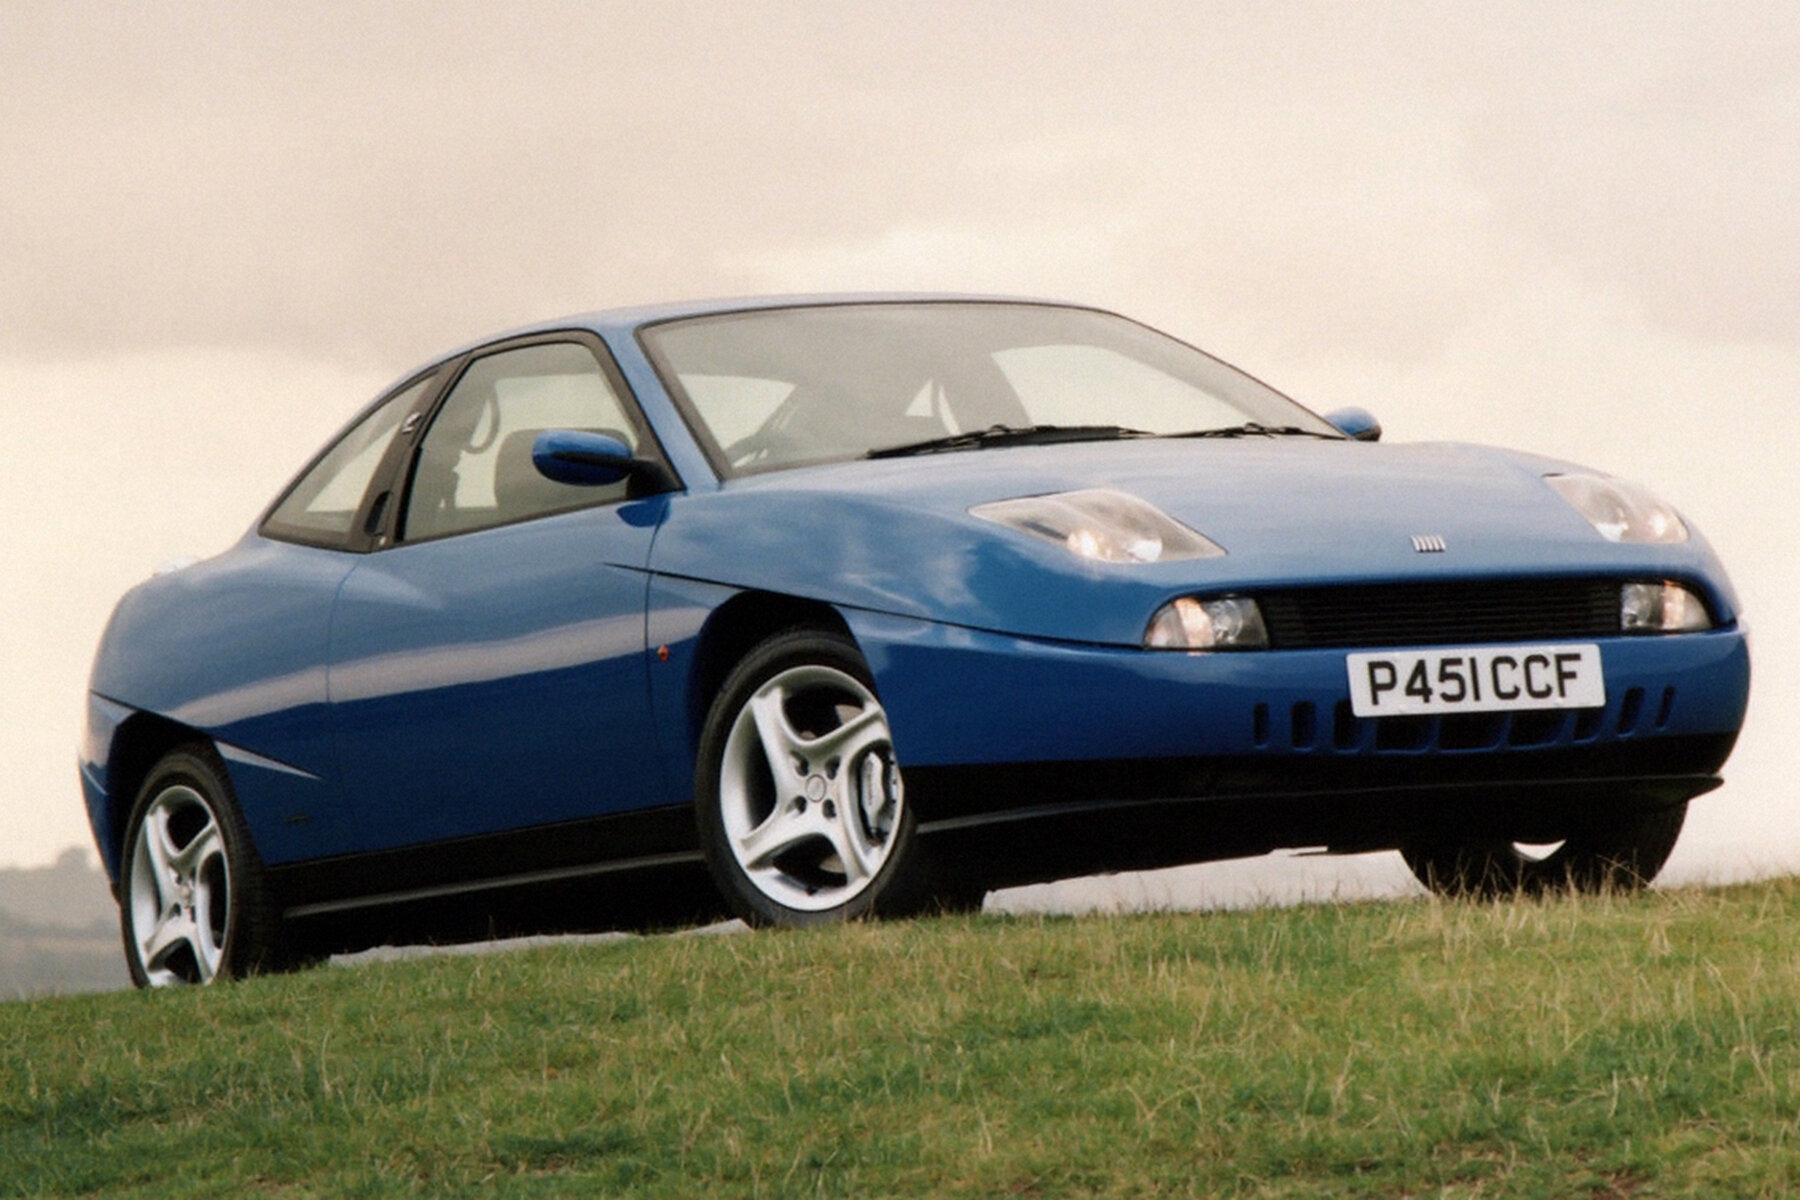 Fiat Coupe divided opinions back in the 1990s, but time has been very kind to it.